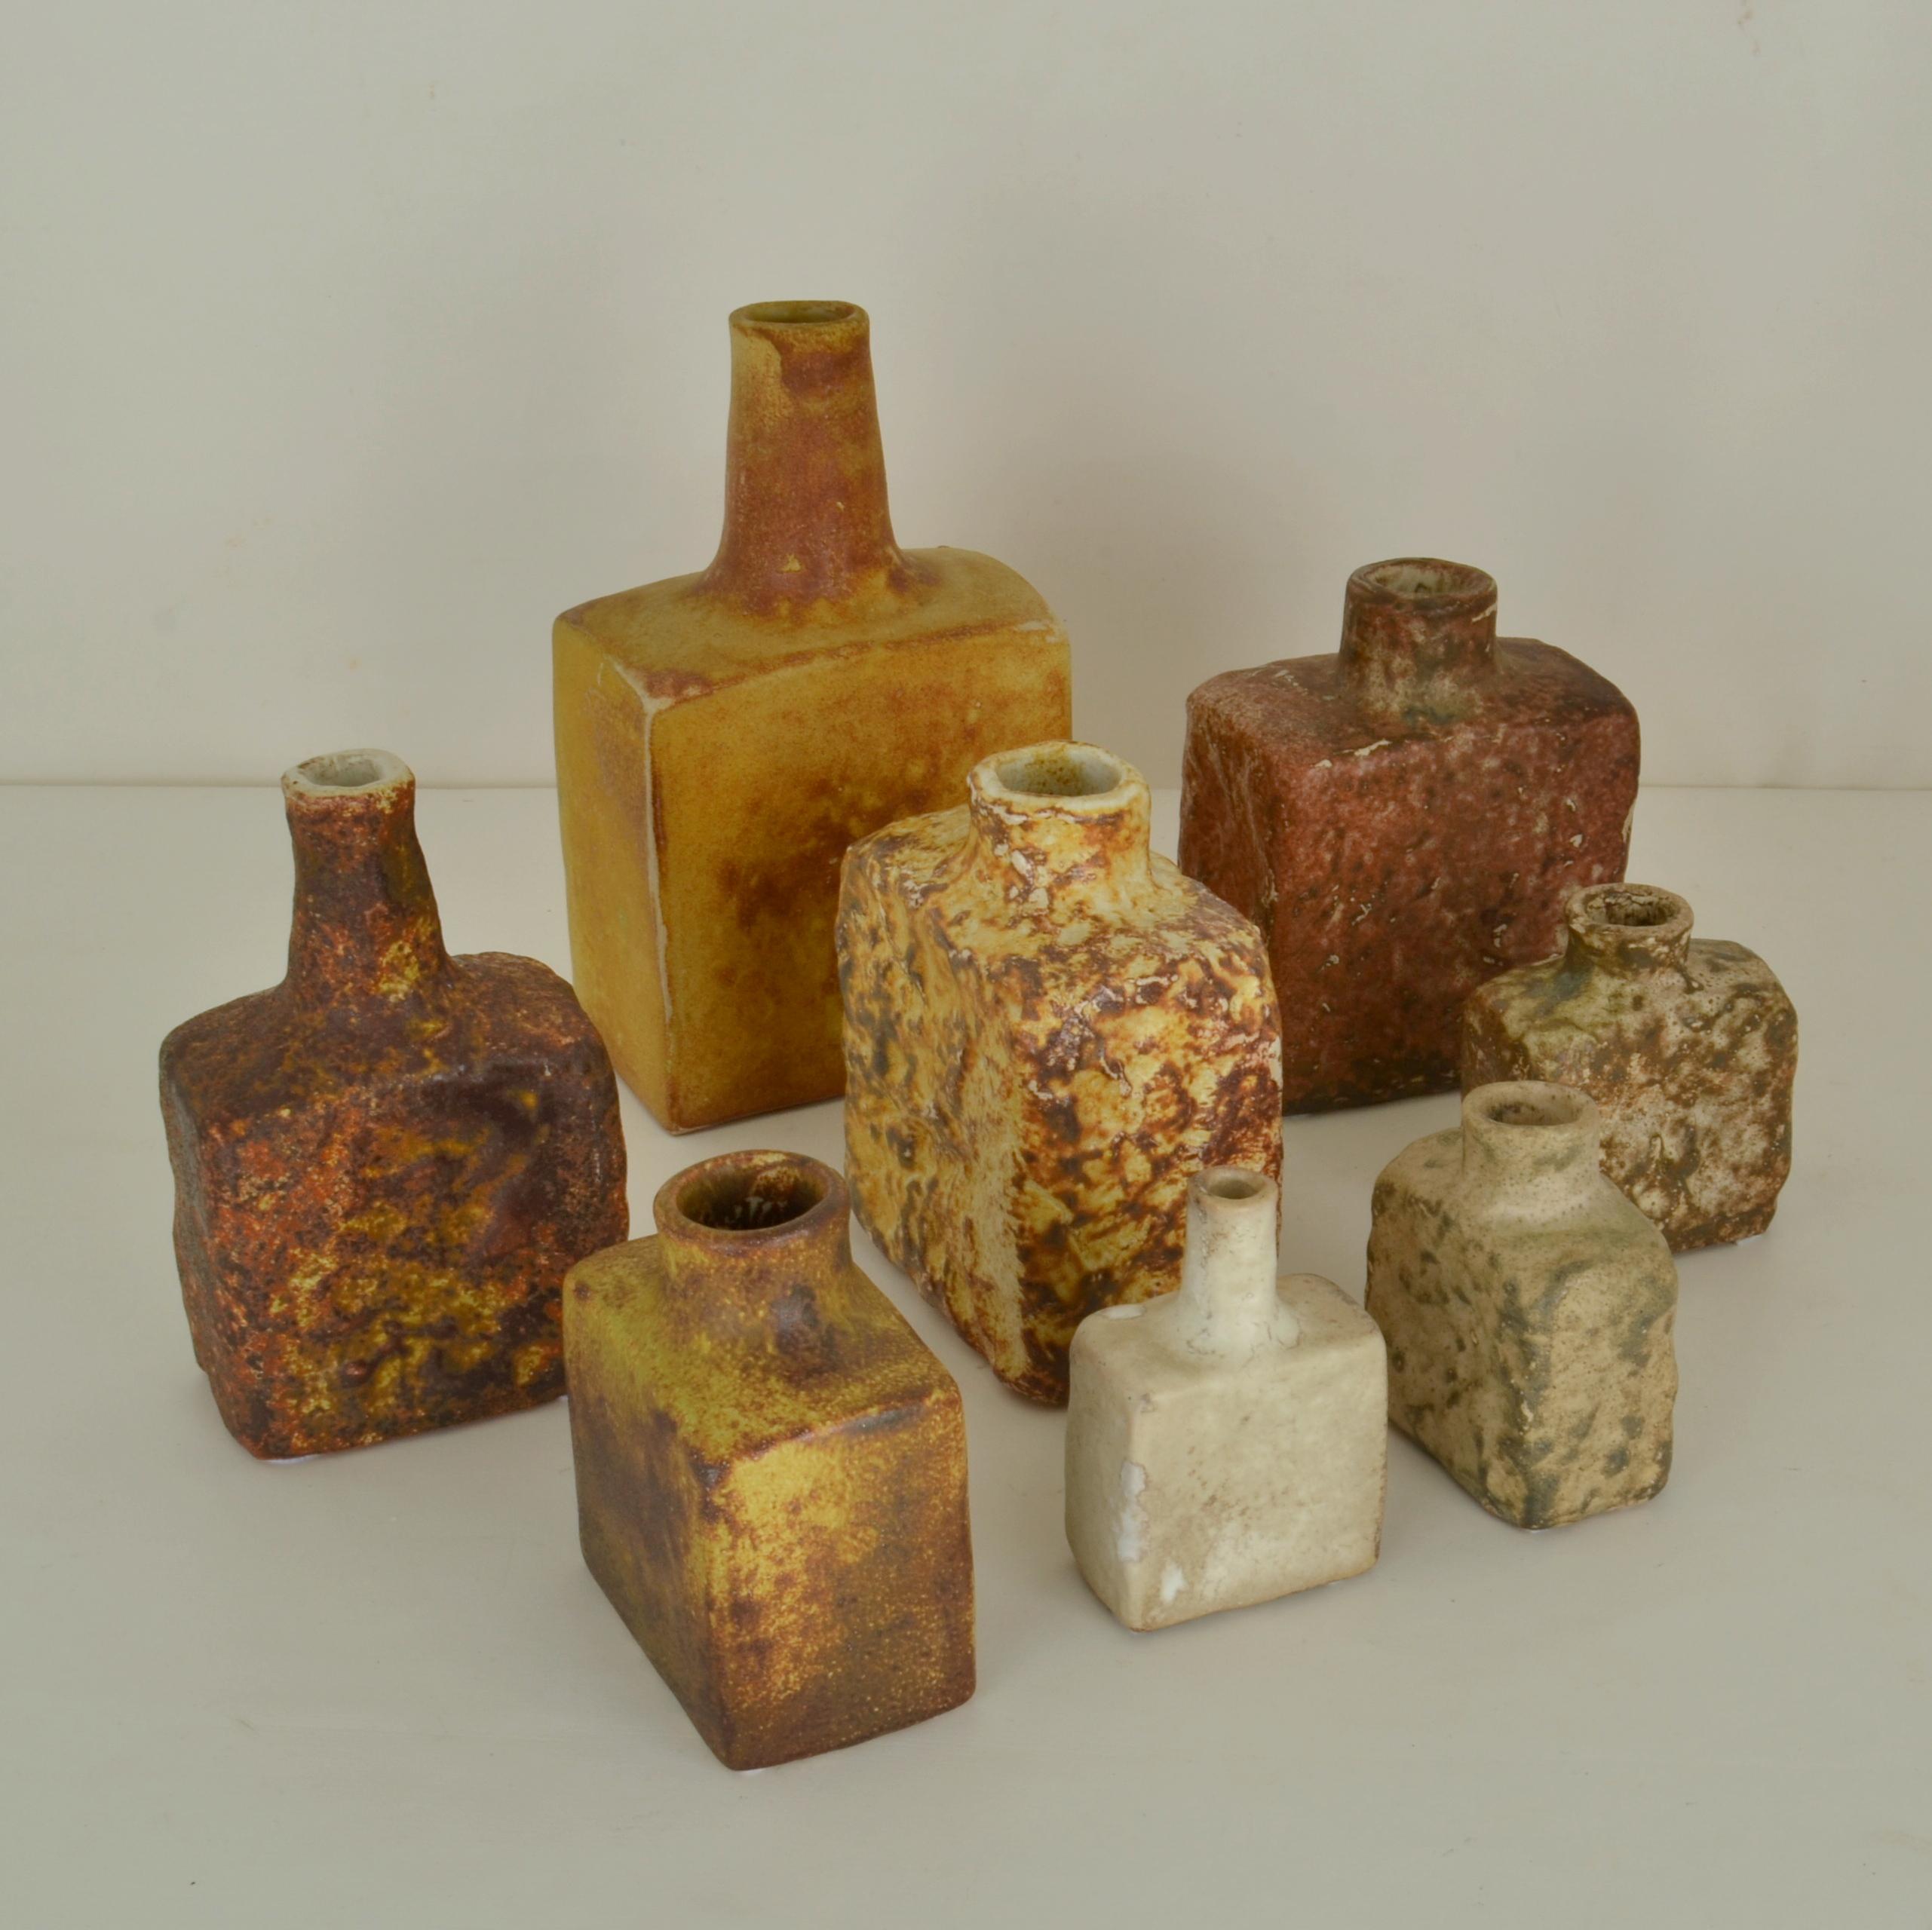 Set of eight Mid-Century Modern square studio pottery vases glazed in ocher and natural earth tones hand formed and in various heights by Mobach's Dutch ceramist made in the 1960's. The glazes made of natural resources are highly influenced by